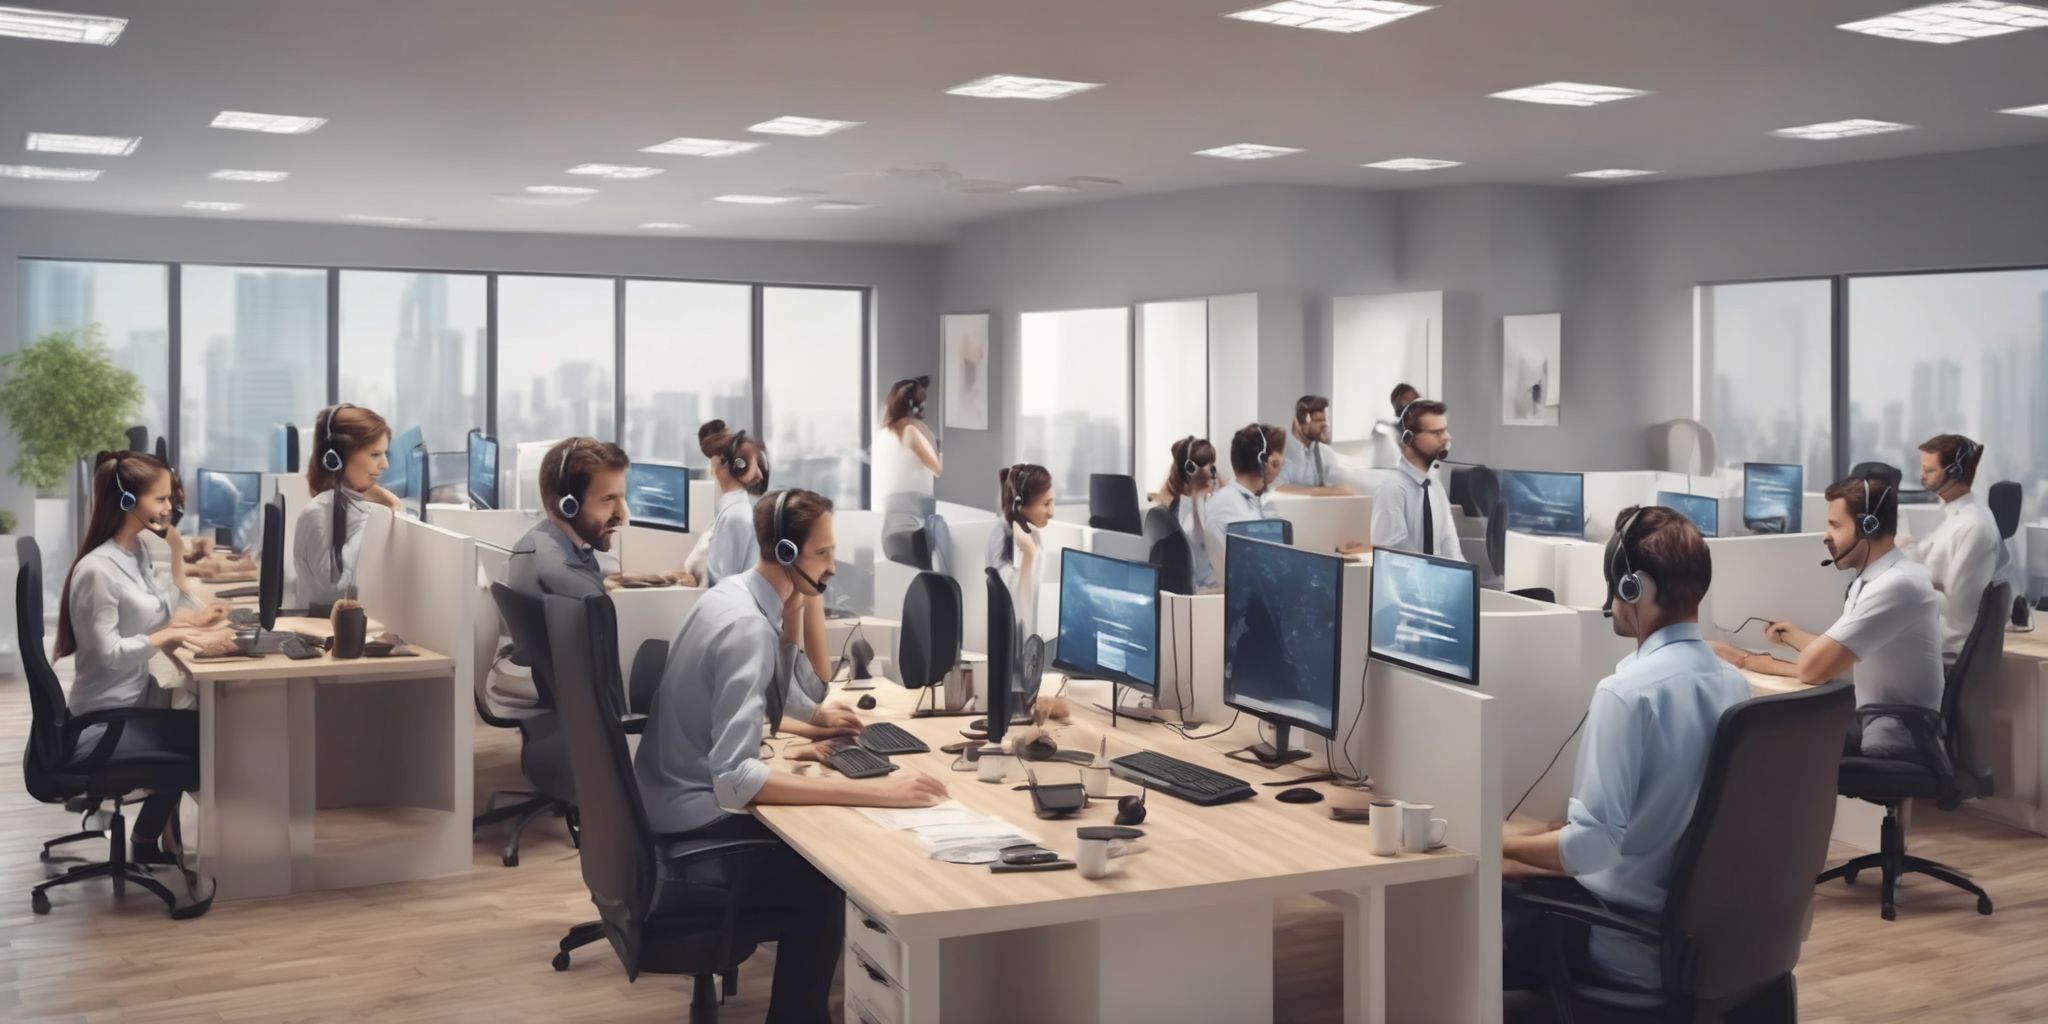 Call center  in realistic, photographic style